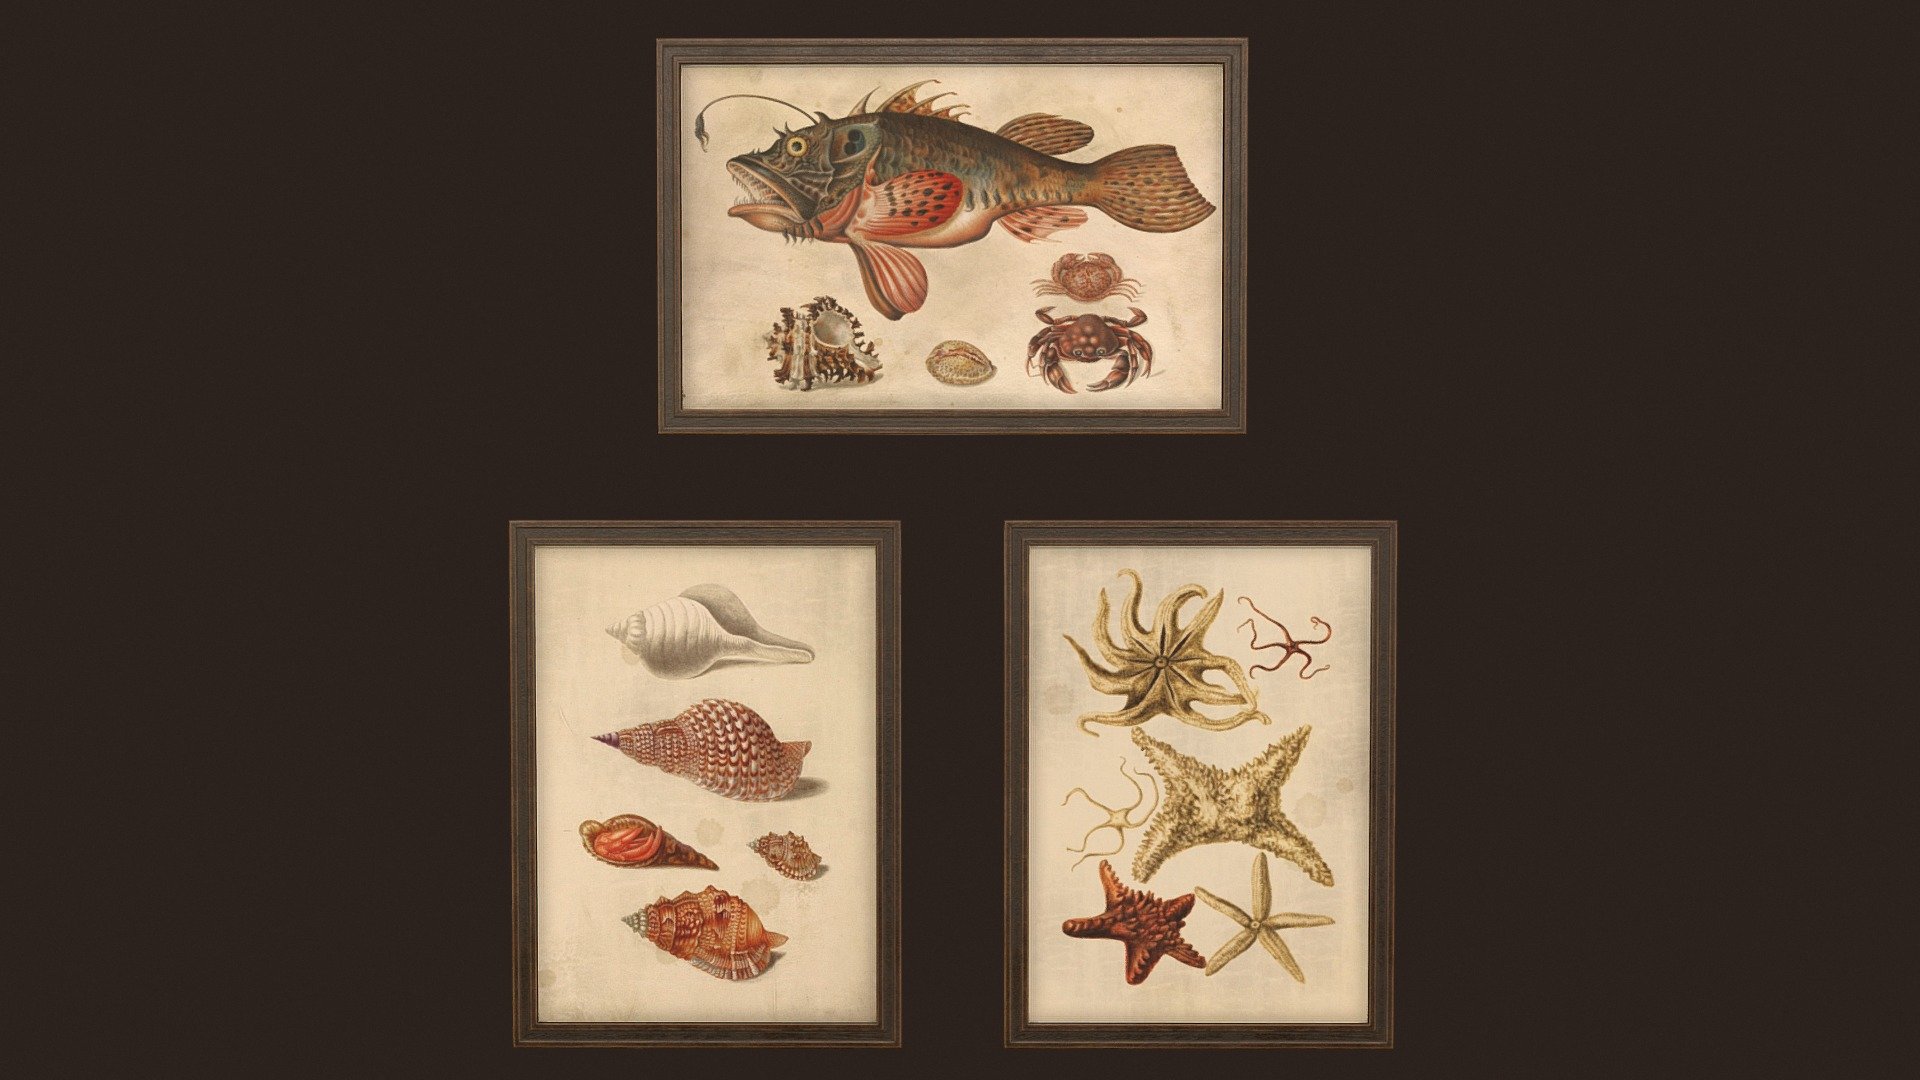 This pack includes 3 pictures with artwork by Maria Sibylla Merian (1647-1717).

UVs: channel 1: overlapping; channel 2: non-overlapping (for baking lightmaps).

Formats: FBX, Obj. Textures format: TGA. Textures resolution: 2048x2048px.

Textures set includes:




Metal_Roughness: BaseColor, Roughness, Metallic, Normal, Height, AO.

Unity 5 (Standart Specular): AlbedoTransparency, AO, Normal, SpecularSmoothness.

Unreal Engine 4: BaseColor, OcclusionRoughnessMetallic, Normal.



More pictures:

Herbarium pictures: https://sketchfab.com/3d-models/herbarium-pictures-08f2bad07b03466f9cedad9988201e0c

Entomological pictures: https://sketchfab.com/3d-models/entomological-pictures-e8d594361b3240f6a69964bc237eb4eb



Artstation: https://www.artstation.com/tatianagladkaya

Instagram: https://www.instagram.com/t.gladkaya_ - Pictures - Download Free 3D model by Tatiana Gladkaya (@tatiana_gladkaya) 3d model